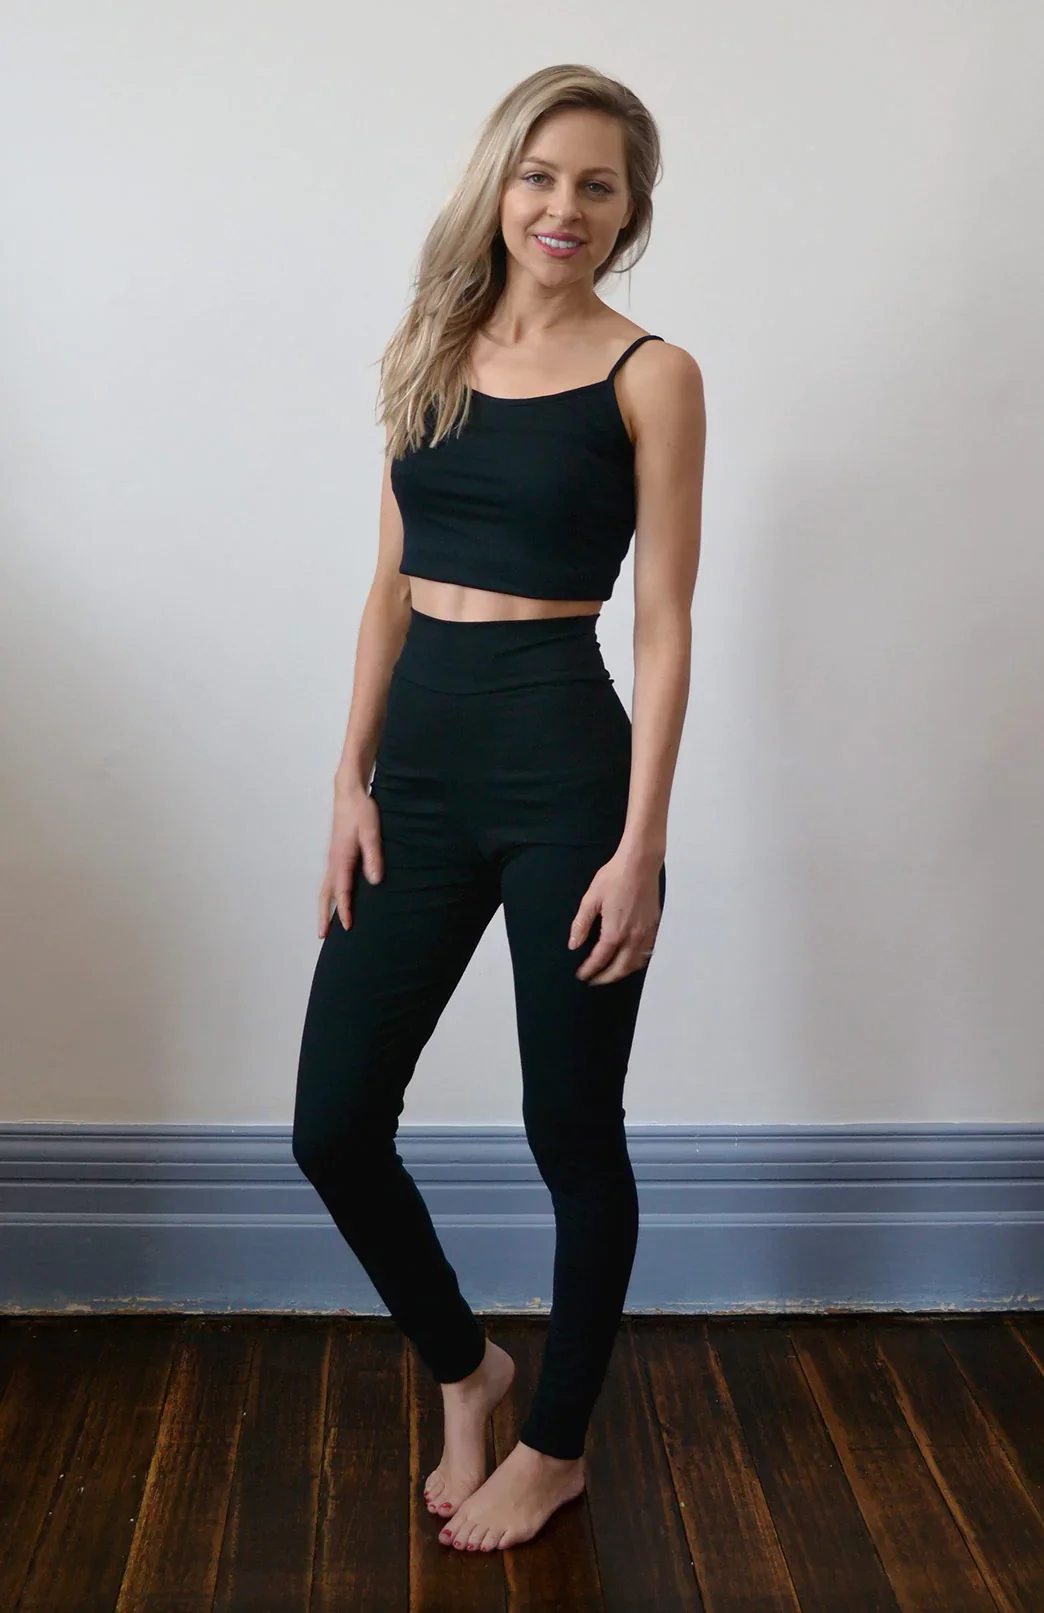 High-Waisted Leggings - For Flattering and Comfortable Fit